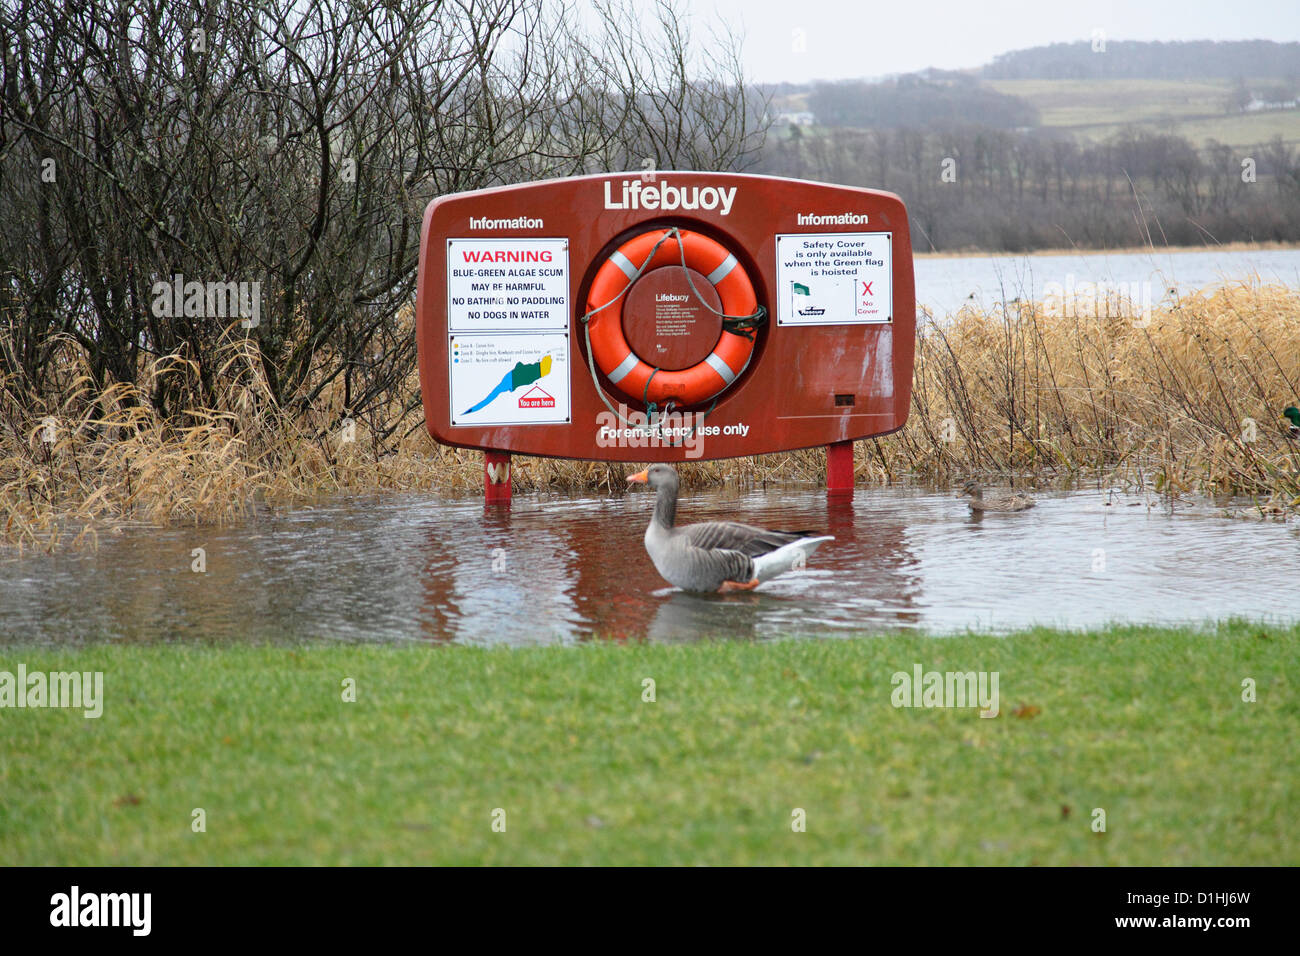 Castle Semple Visitor Centre, Lochwinnoch, Renfrewshire, Scotland, UK, Sunday, 23rd December, 2012. A greylag goose paddling past a flooded lifebuoy stand at Castle Semple Loch in Clyde Muirshiel Regional Park following persistent heavy rain Stock Photo